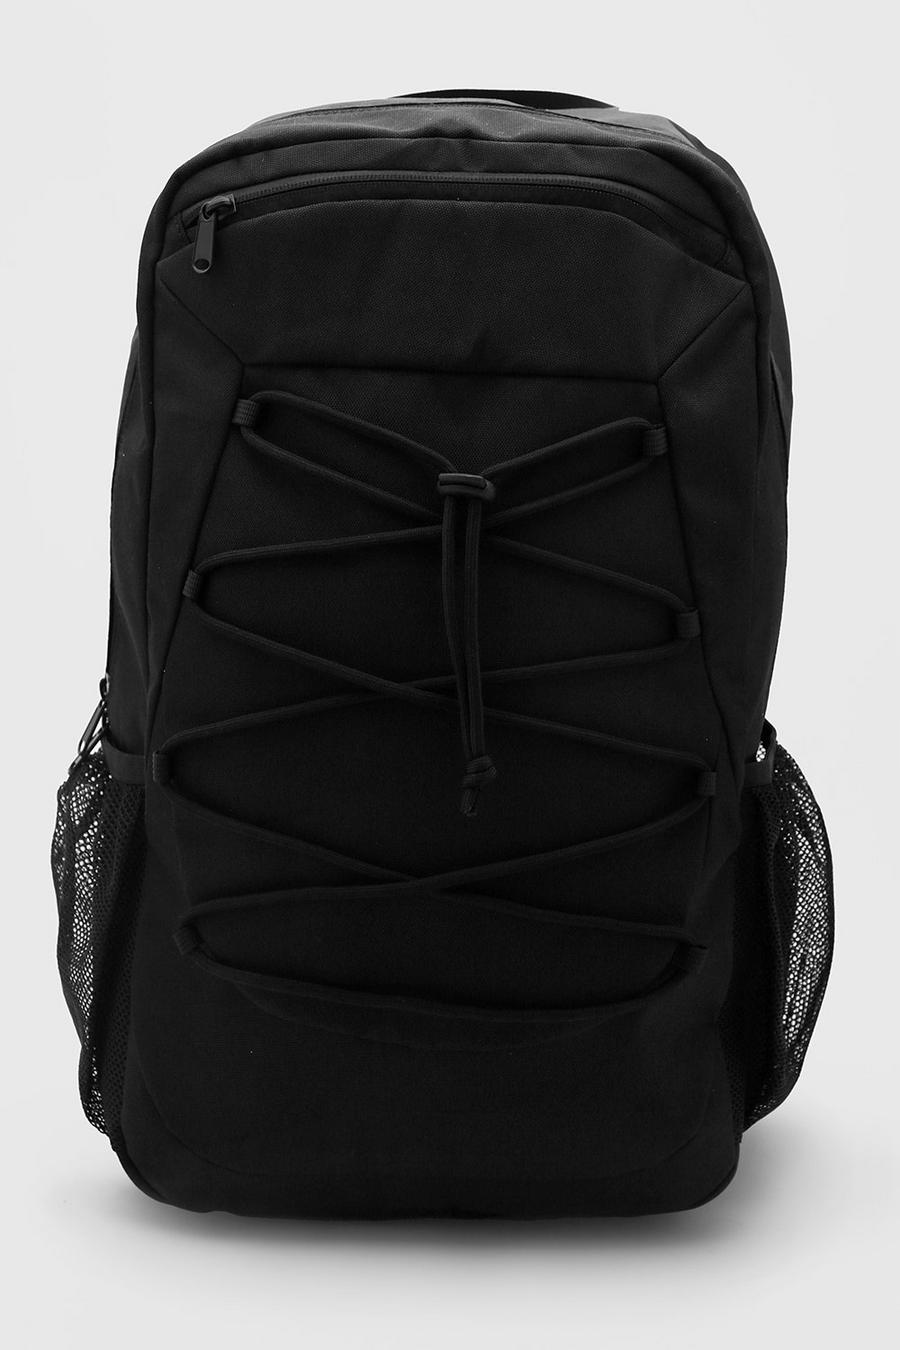 Black Rucksack With Lace Up Detail image number 1